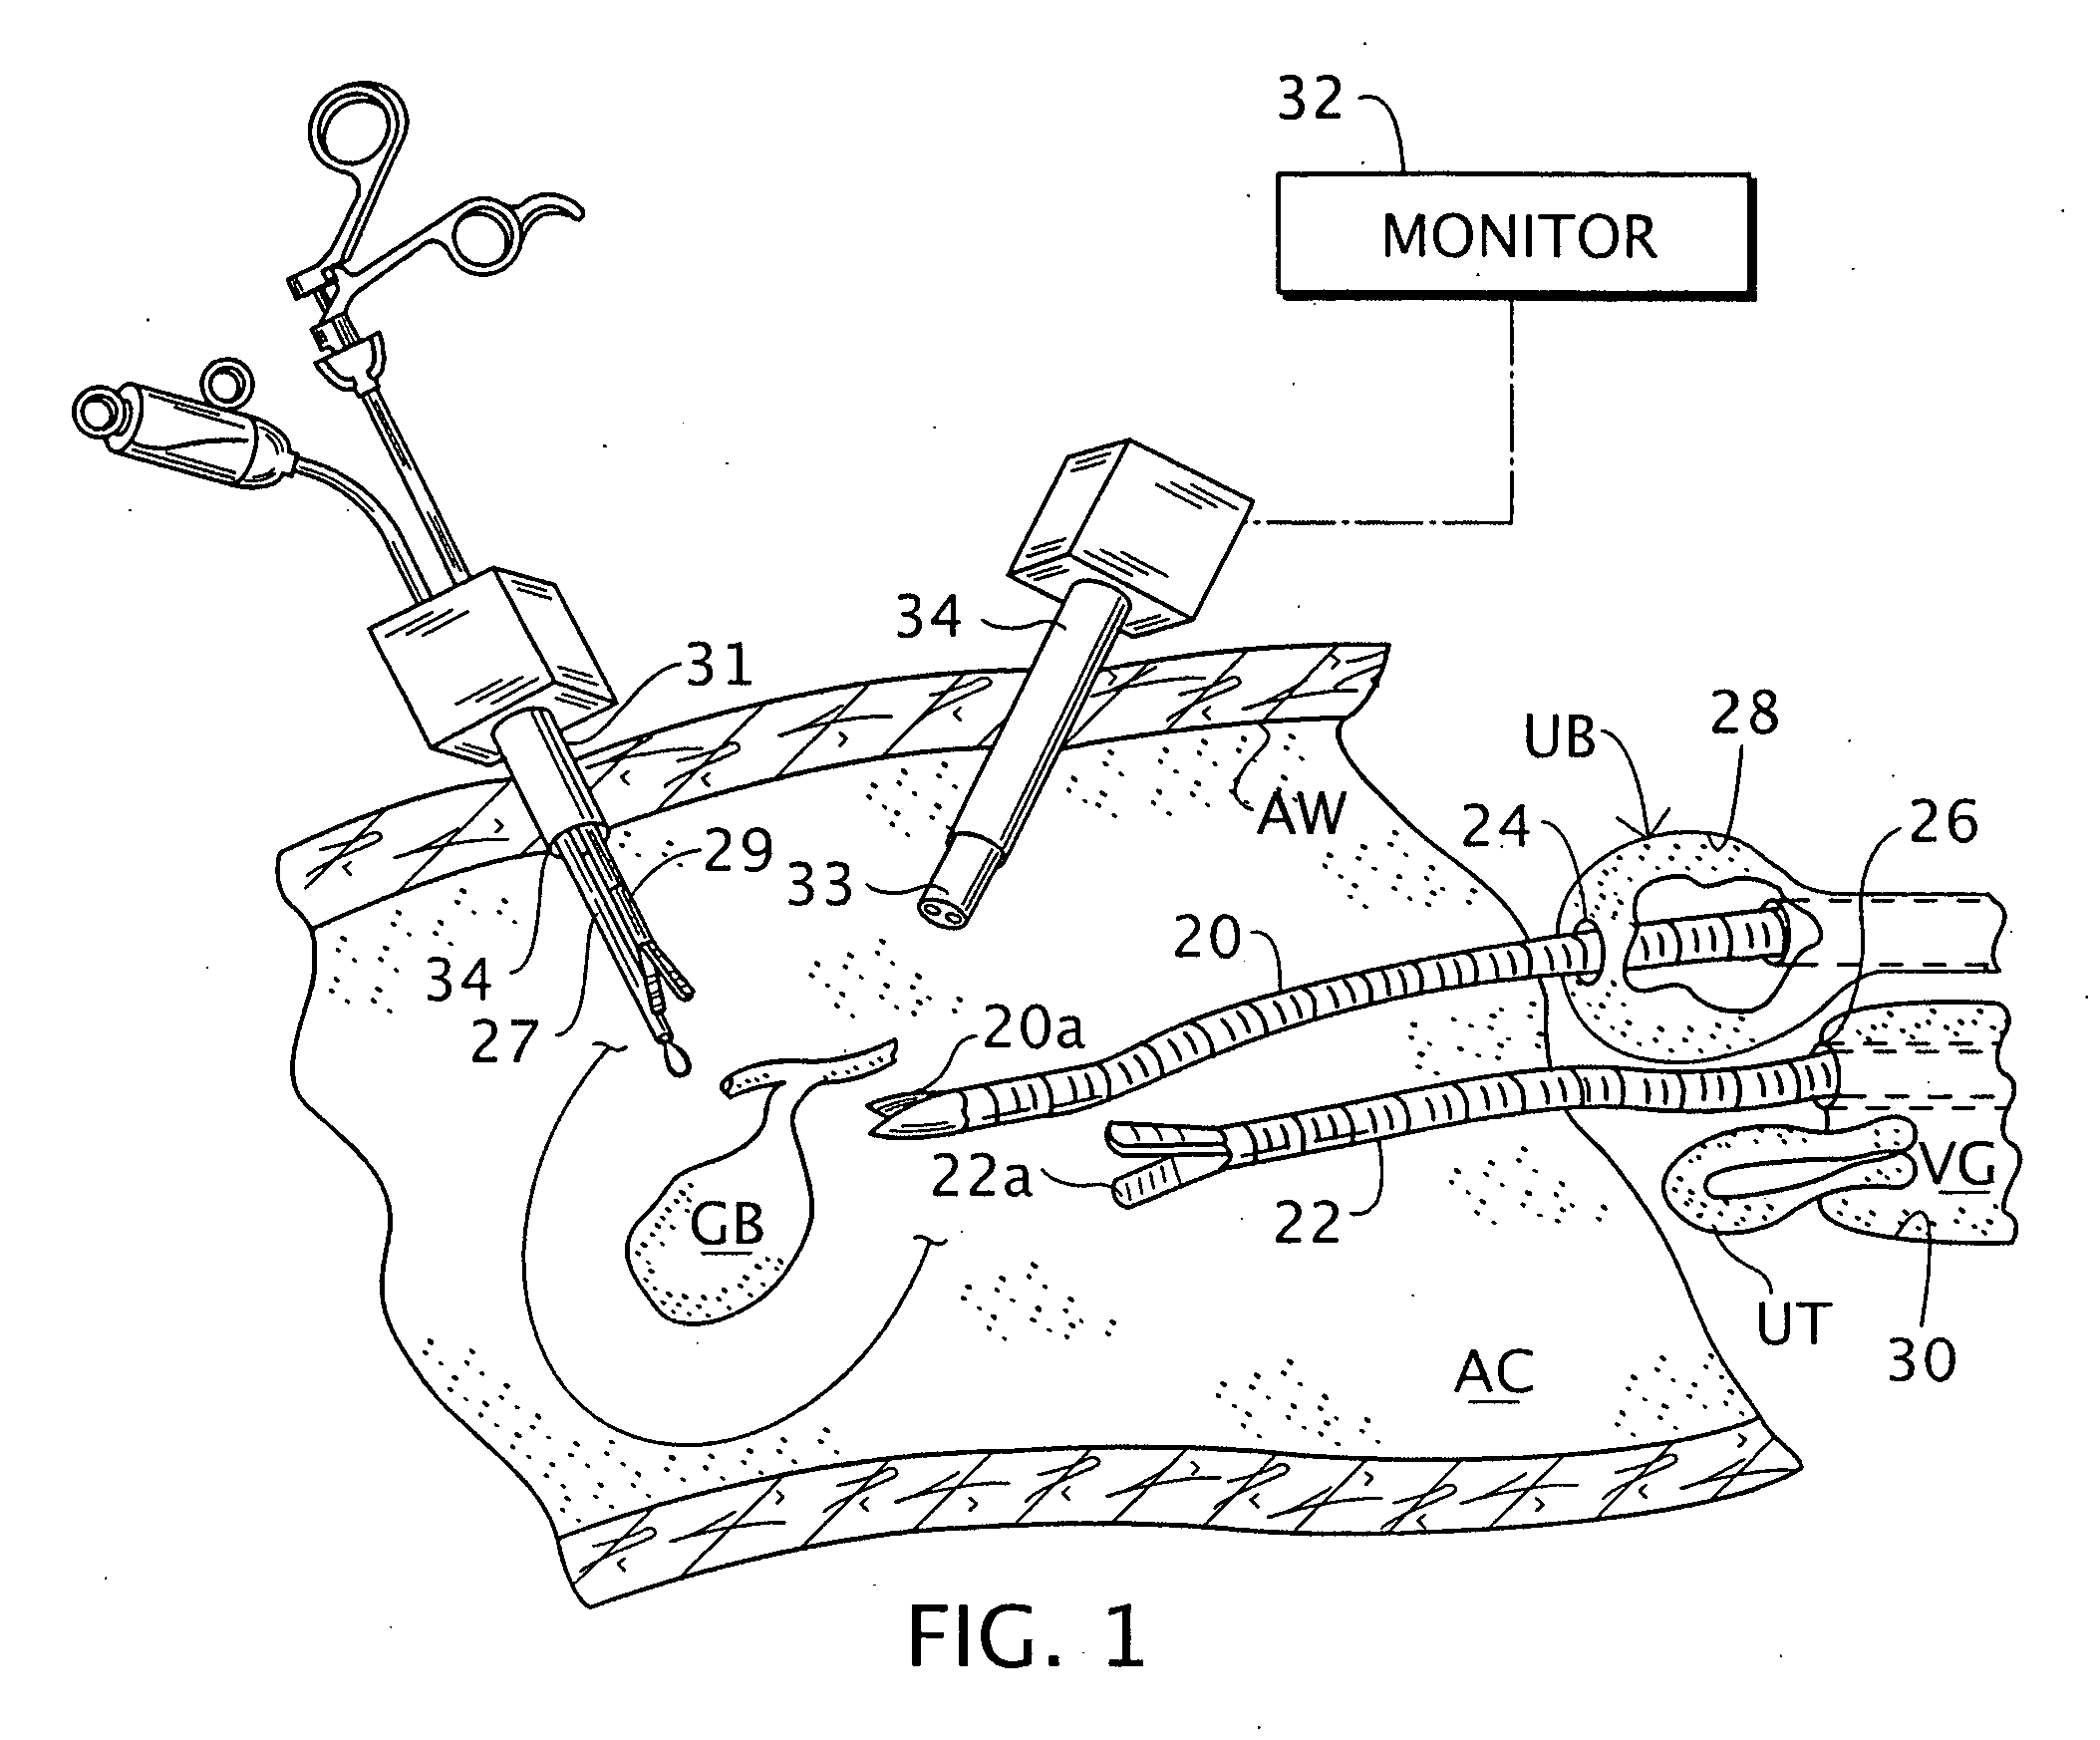 Intra-abdominal medical procedures and device